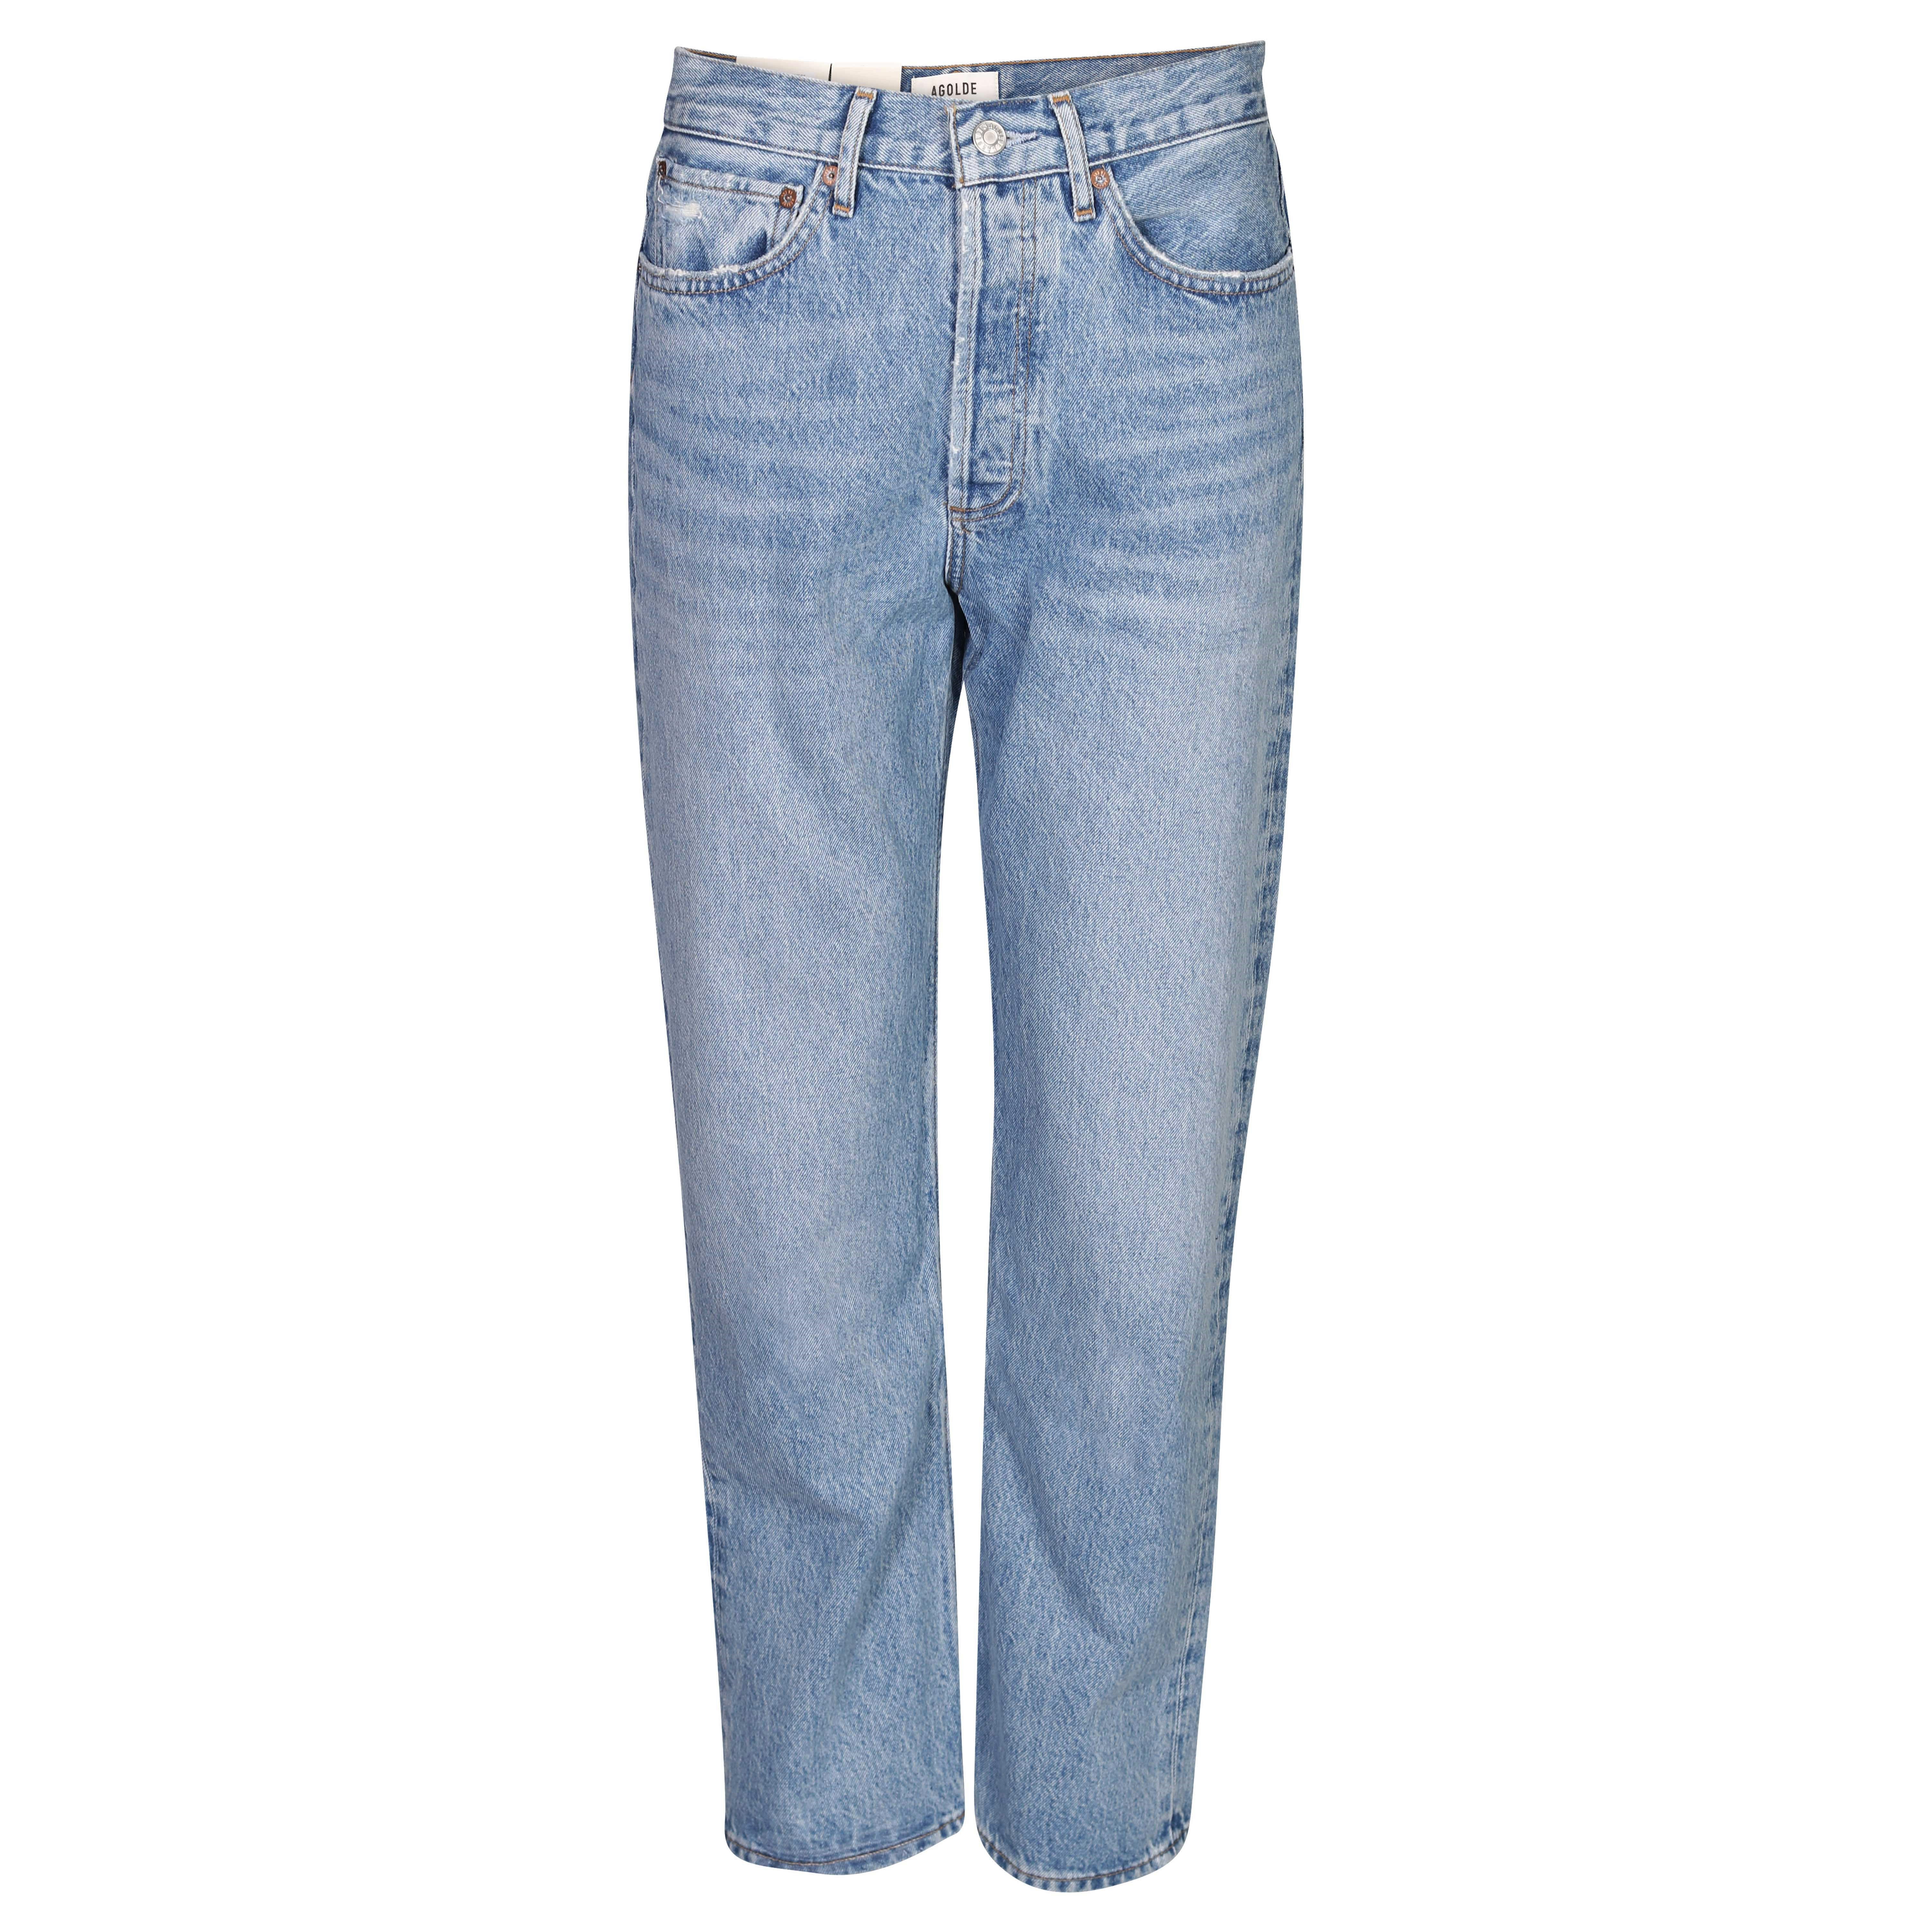 Agolde Jeans 90s Cropped in Scheme Washing W 24